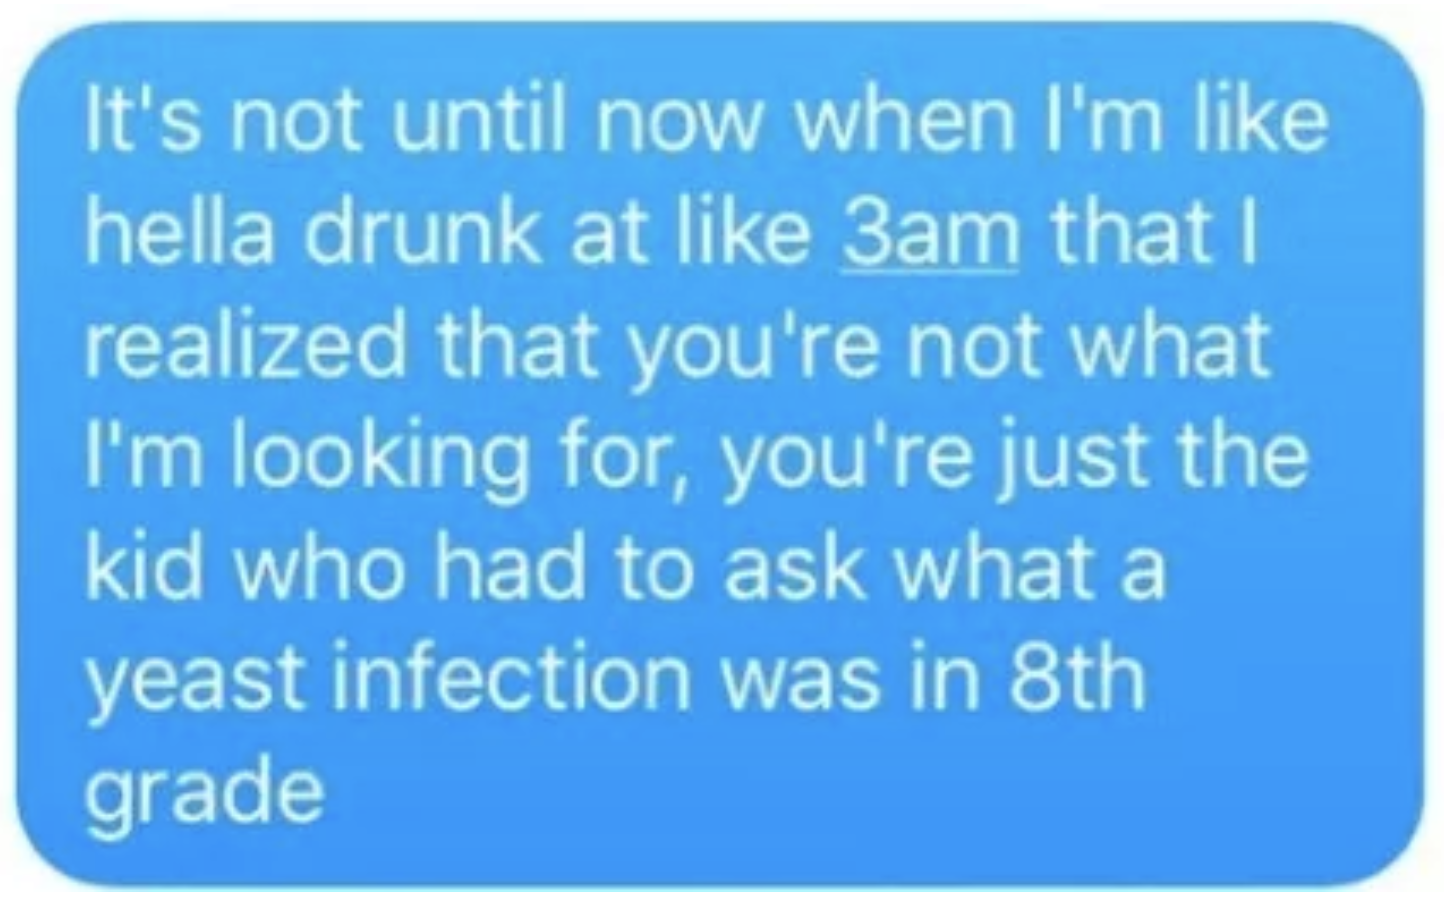 A text where someone says, &quot;It&#x27;s not until now when I&#x27;m hella drunk that I realized you&#x27;re not what I&#x27;m looking for, you&#x27;re the kid who had to ask what a yeast infection was in 8th grade&quot;